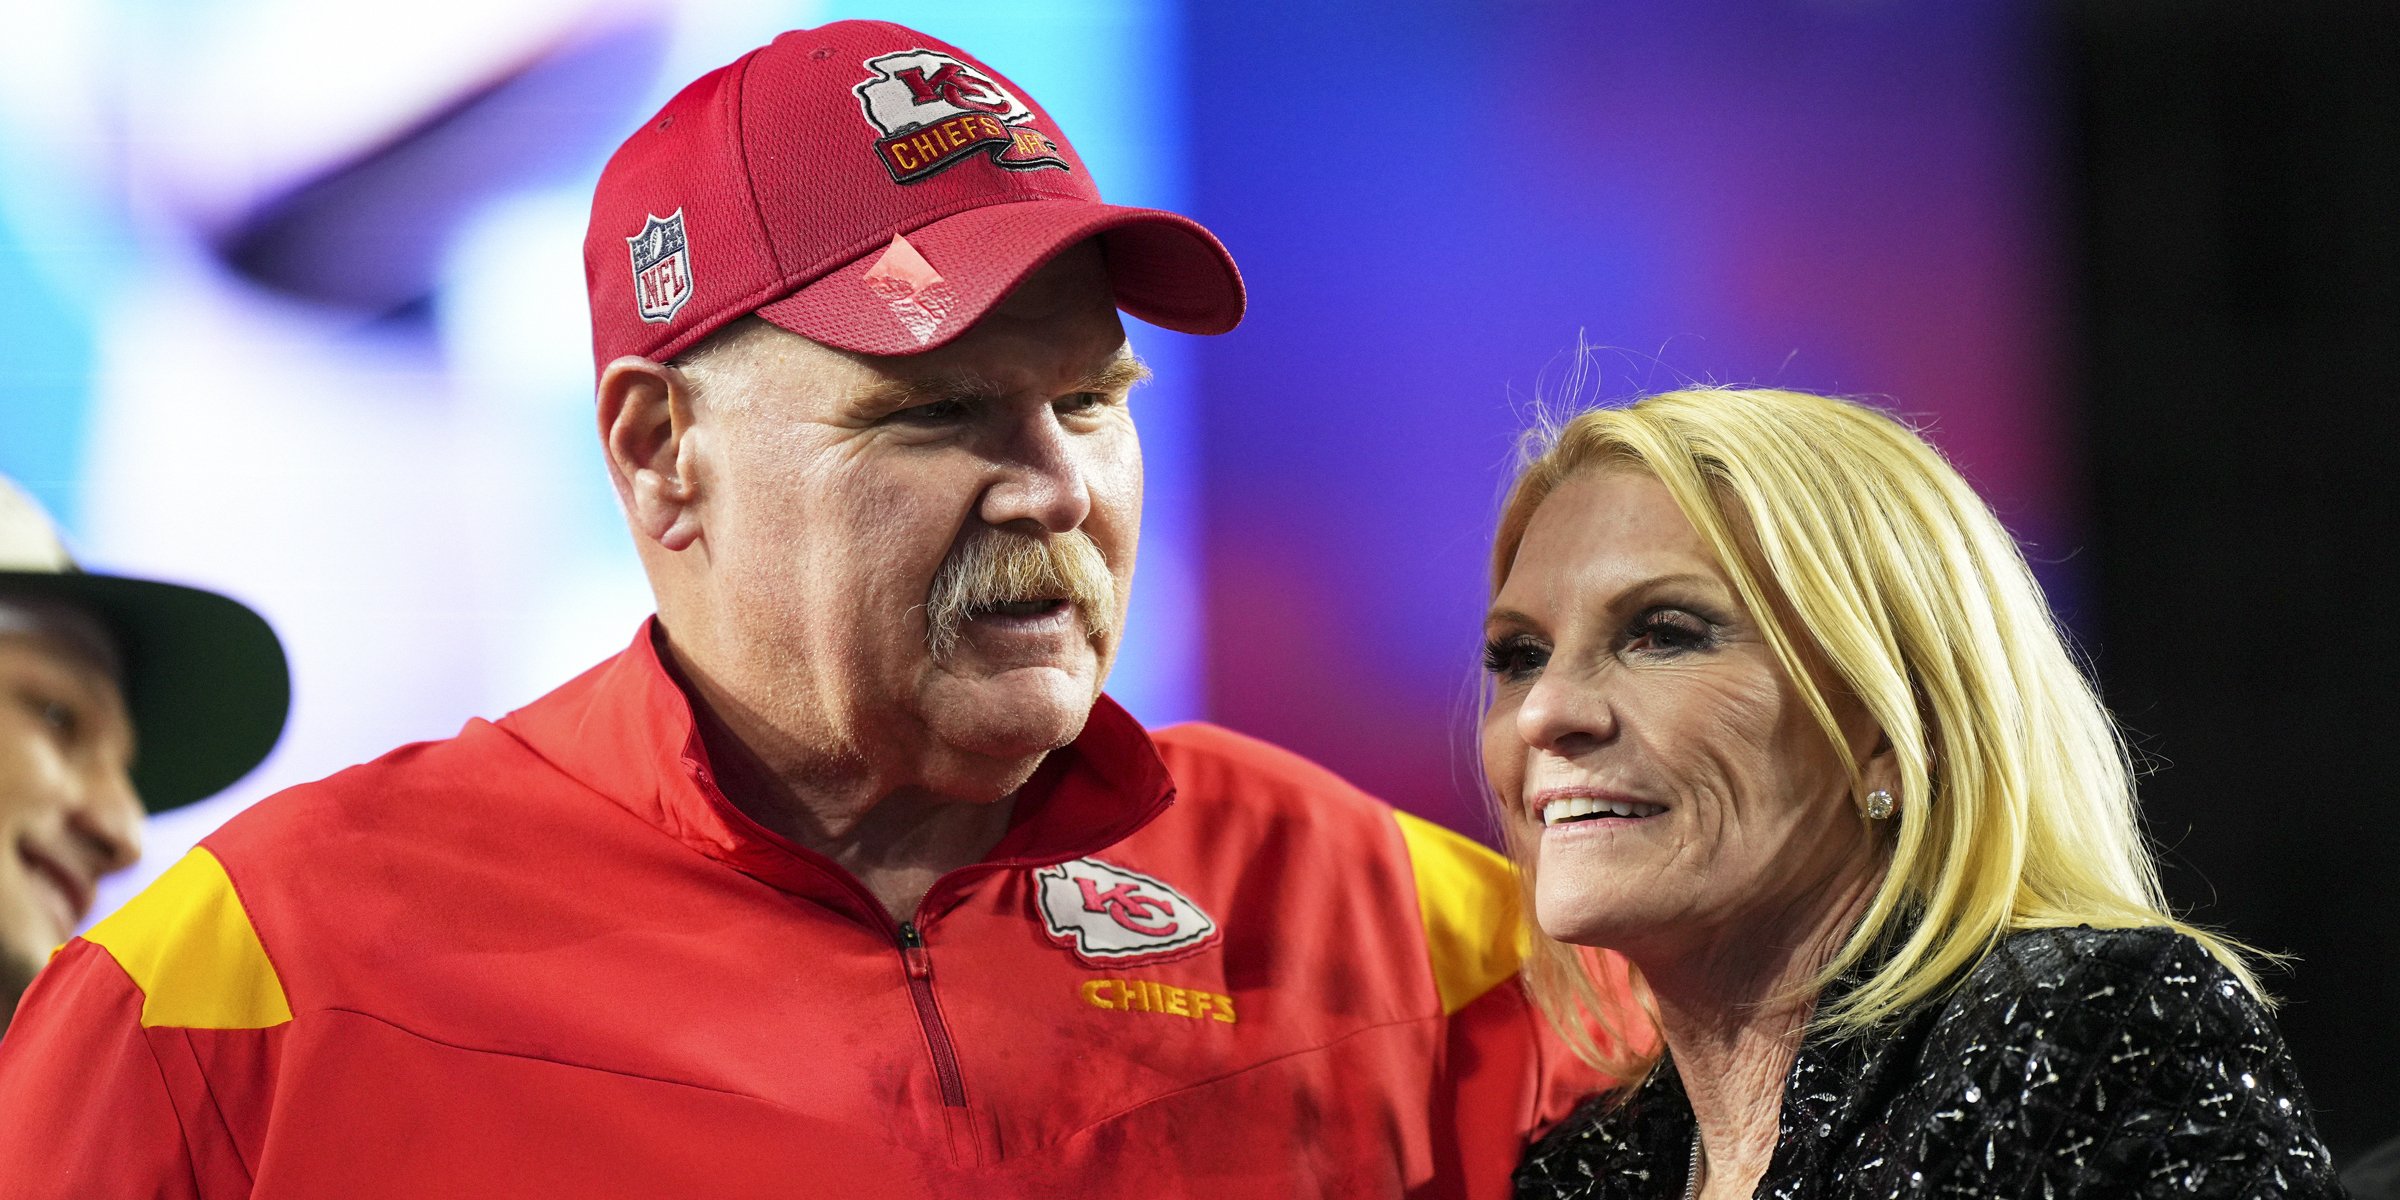 Tammy Reid and Andy Reid | Source: Getty Images